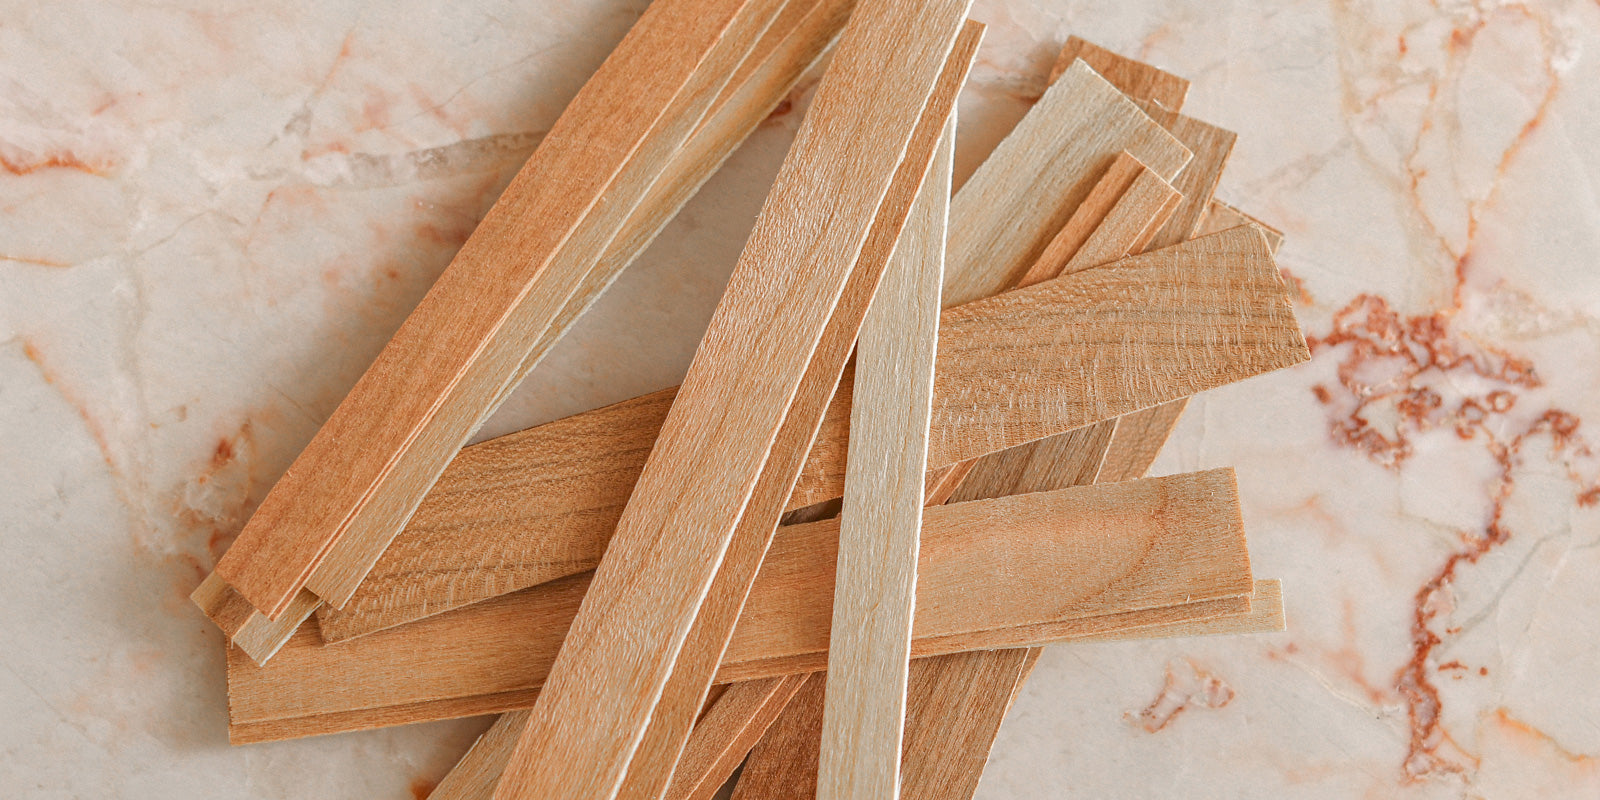 E-BOOK: LEARN HOW TO USE WOODEN WICKS